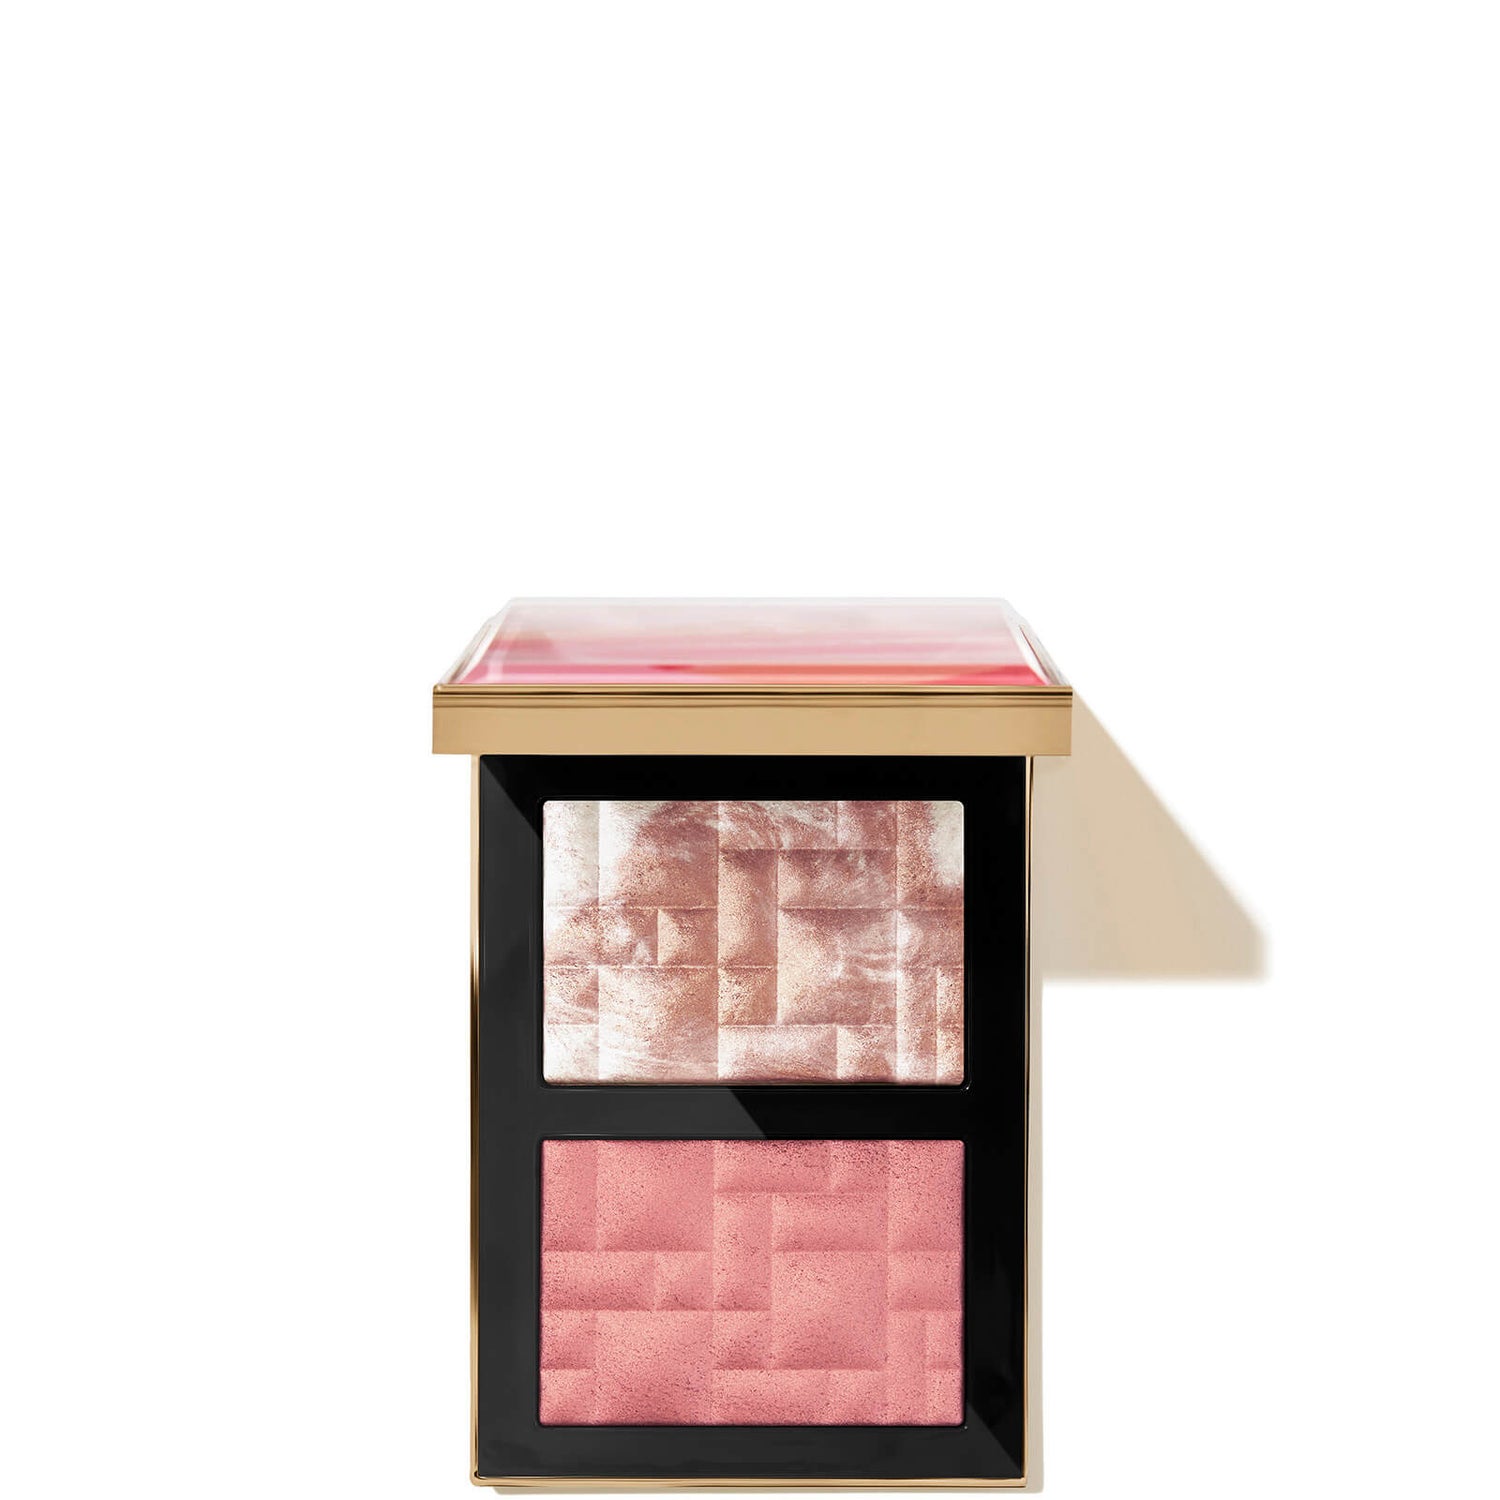 Bobbi Brown Highlighting Duo - Rosy Bouquet 7g